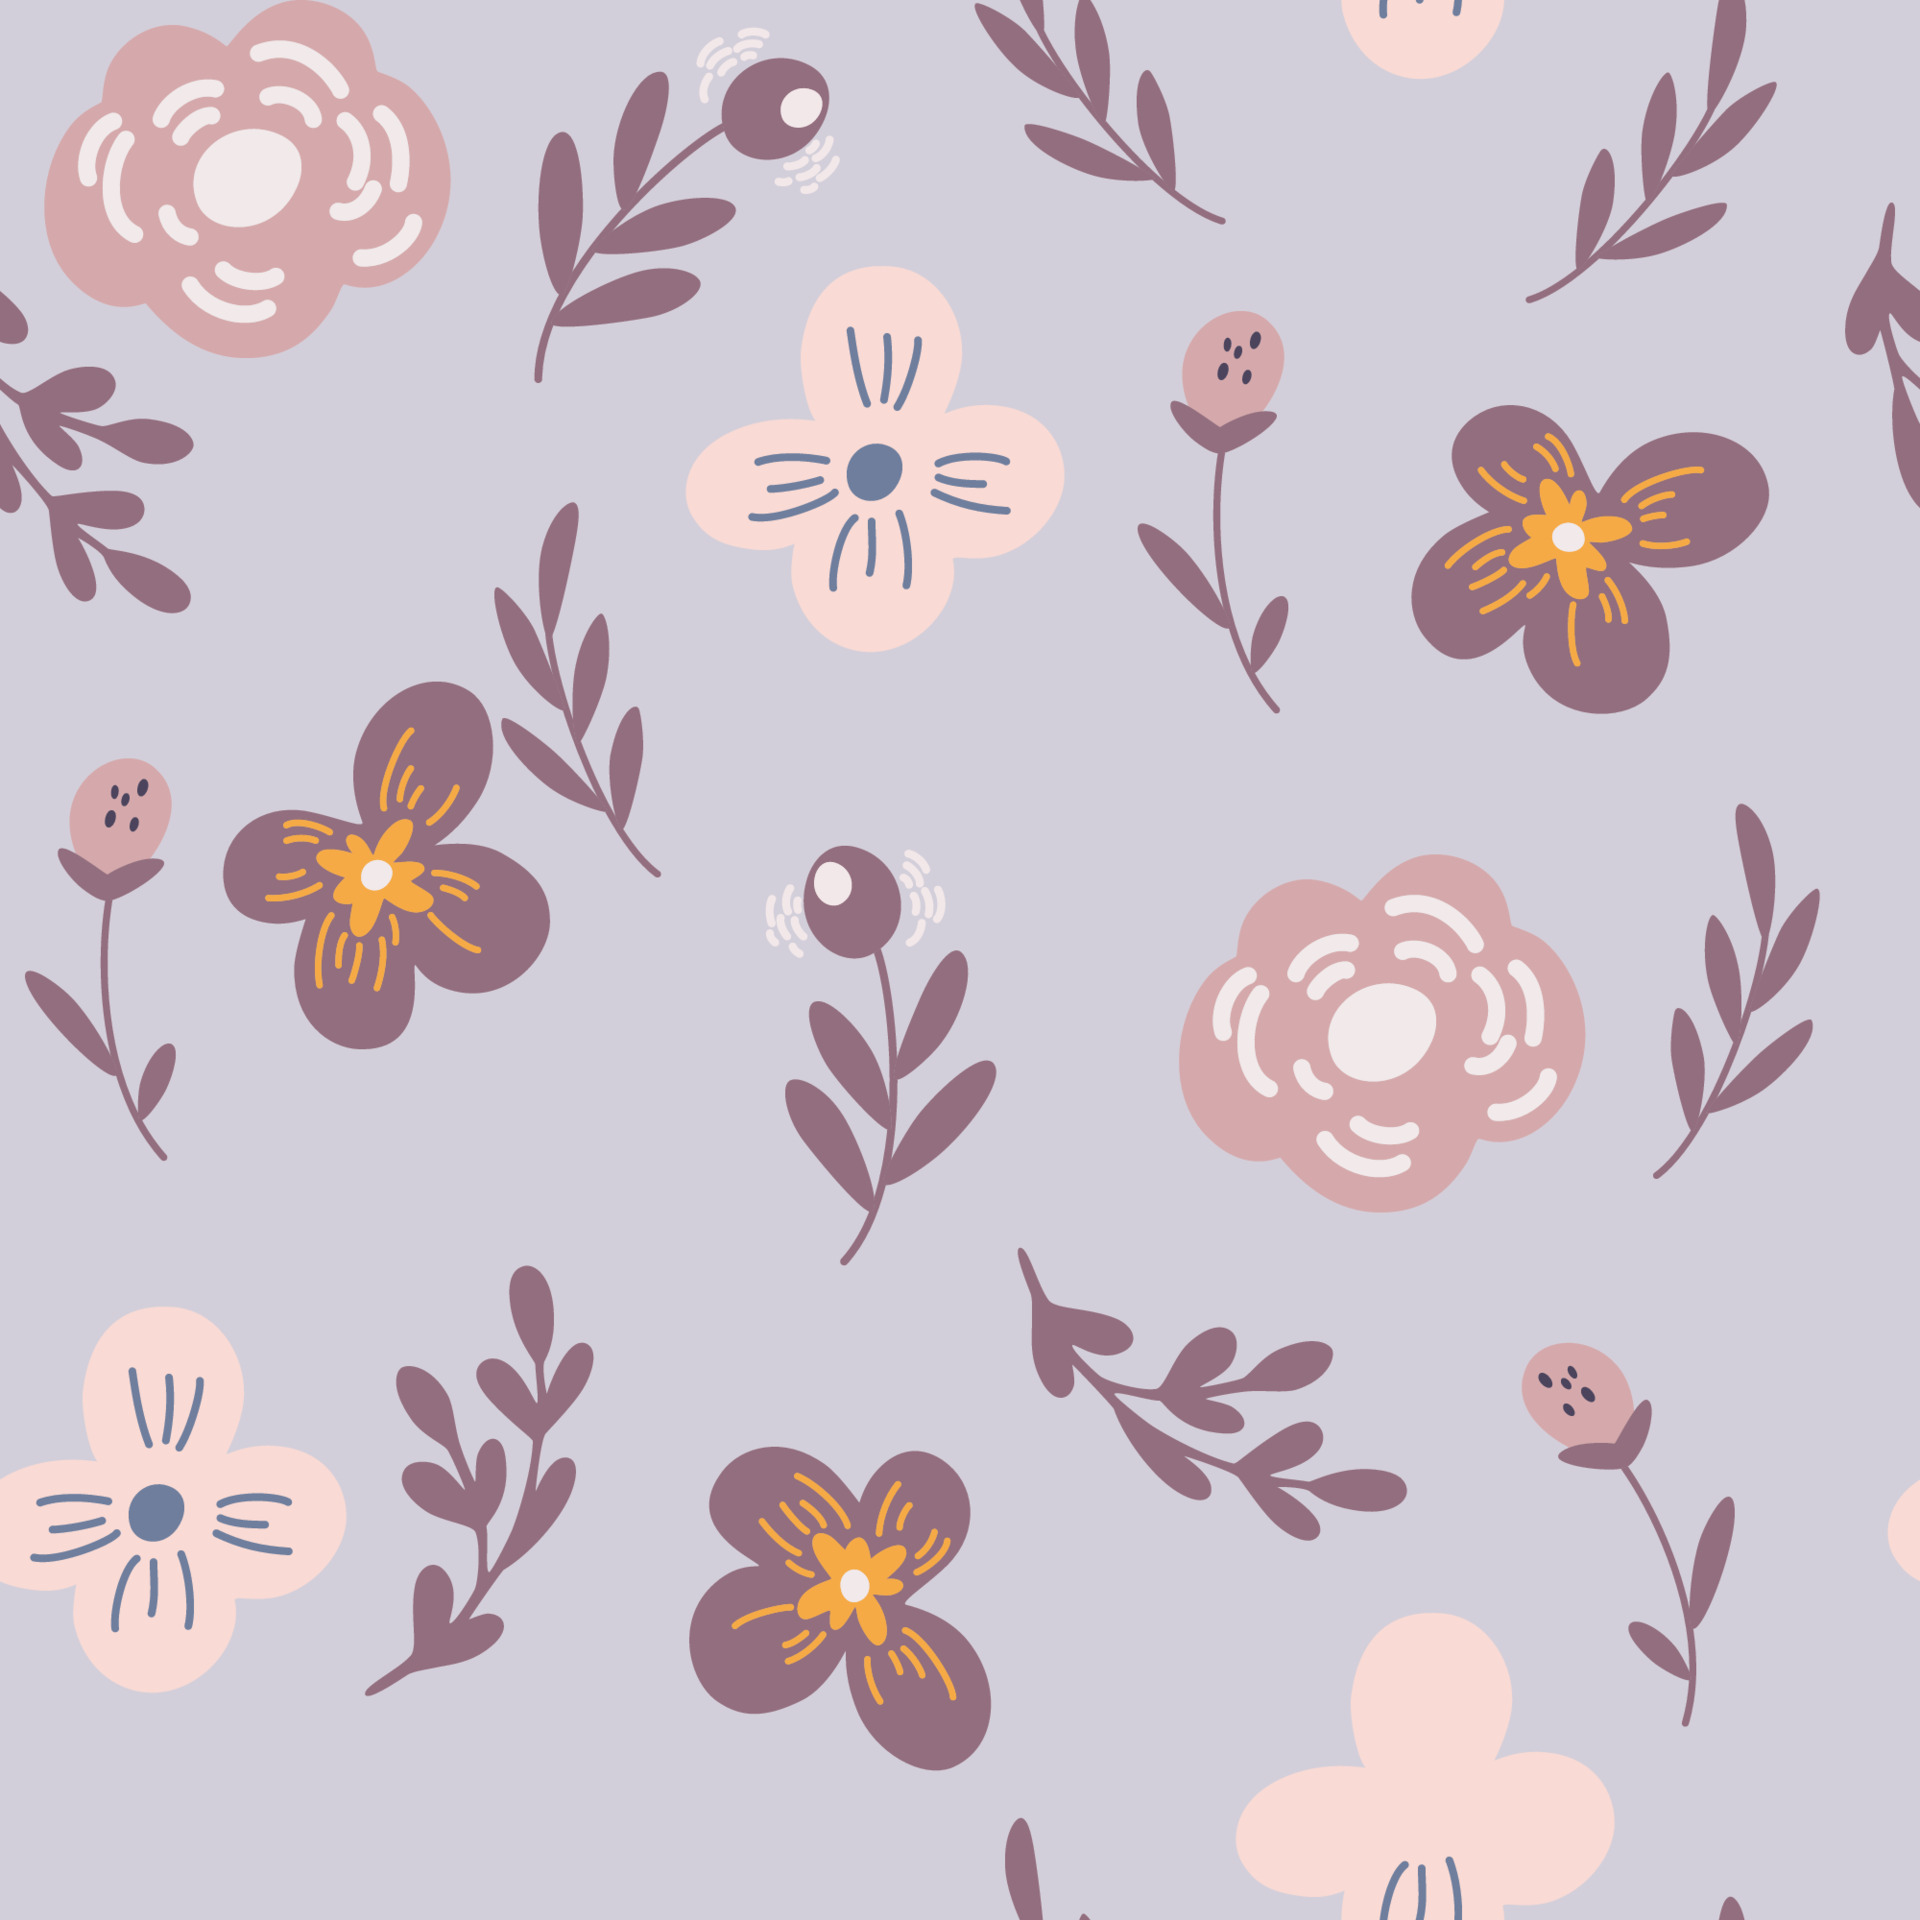 Boho floral seamless pattern. Flower elements in pastel colors. Perfect for textile, wallpaper or print design. Hand Draw Vector illustration